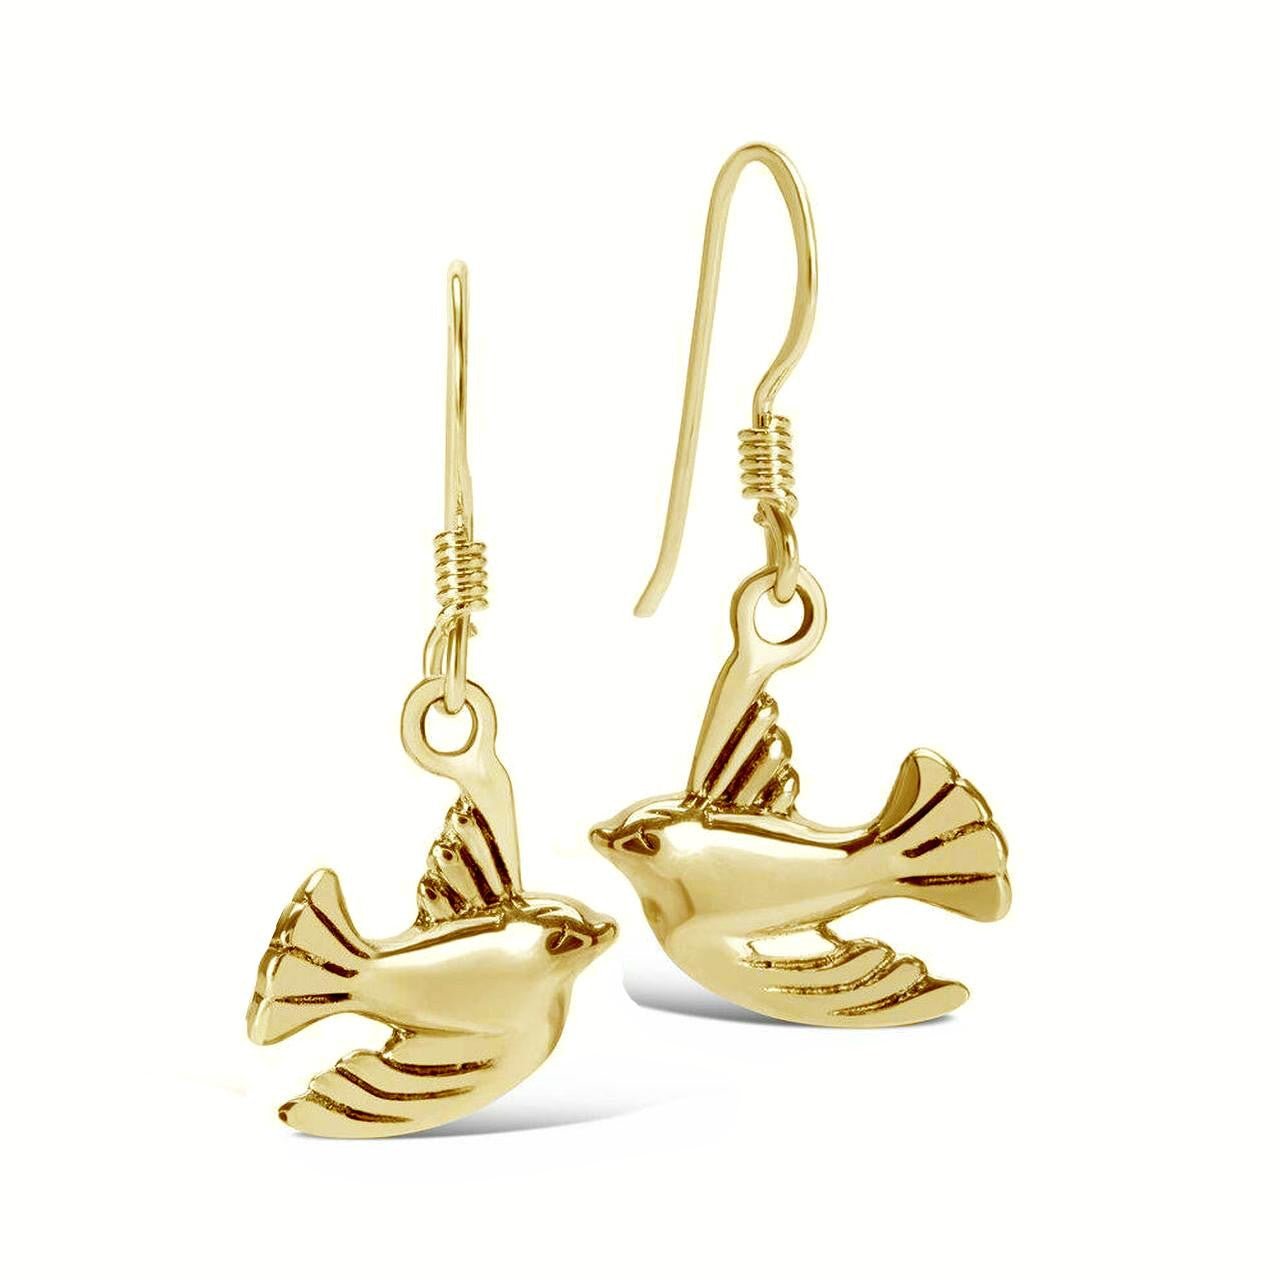 gold bird earrings on a white background